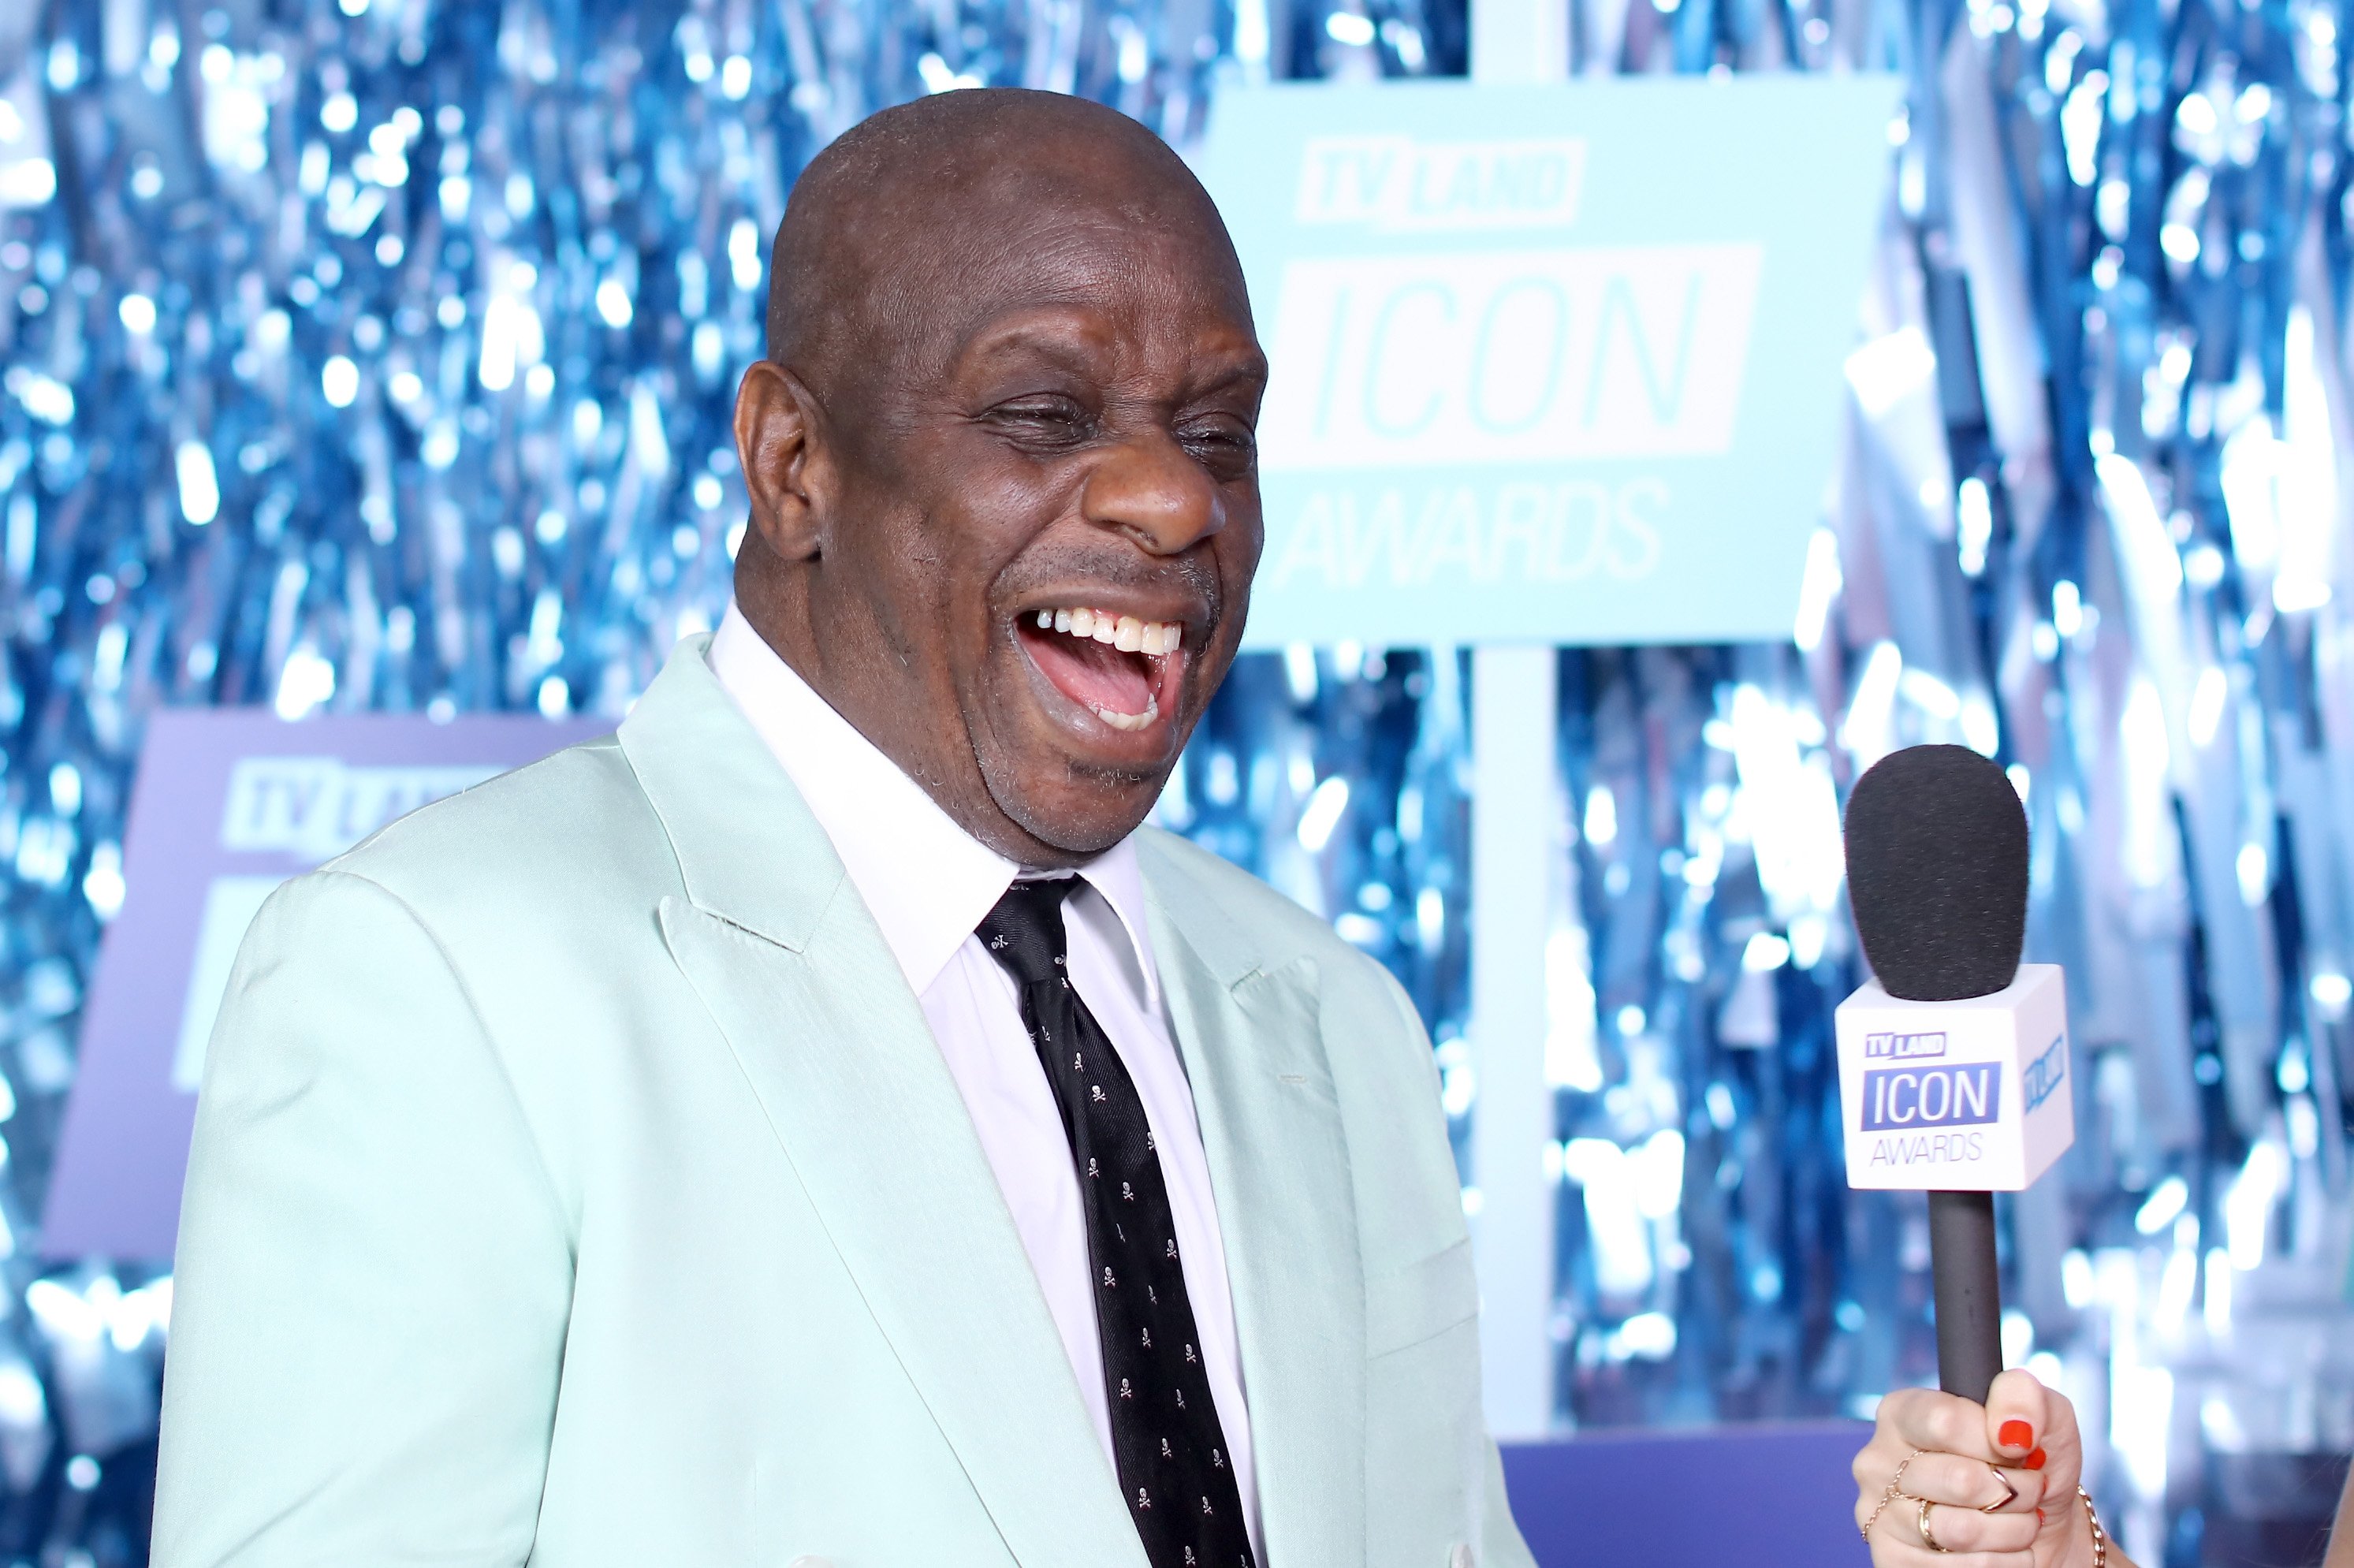 Jimmie Walker at the 2016 TV Land Icon Awards on April 10, 2016 in Santa Monica, California |  Photo: Getty Images